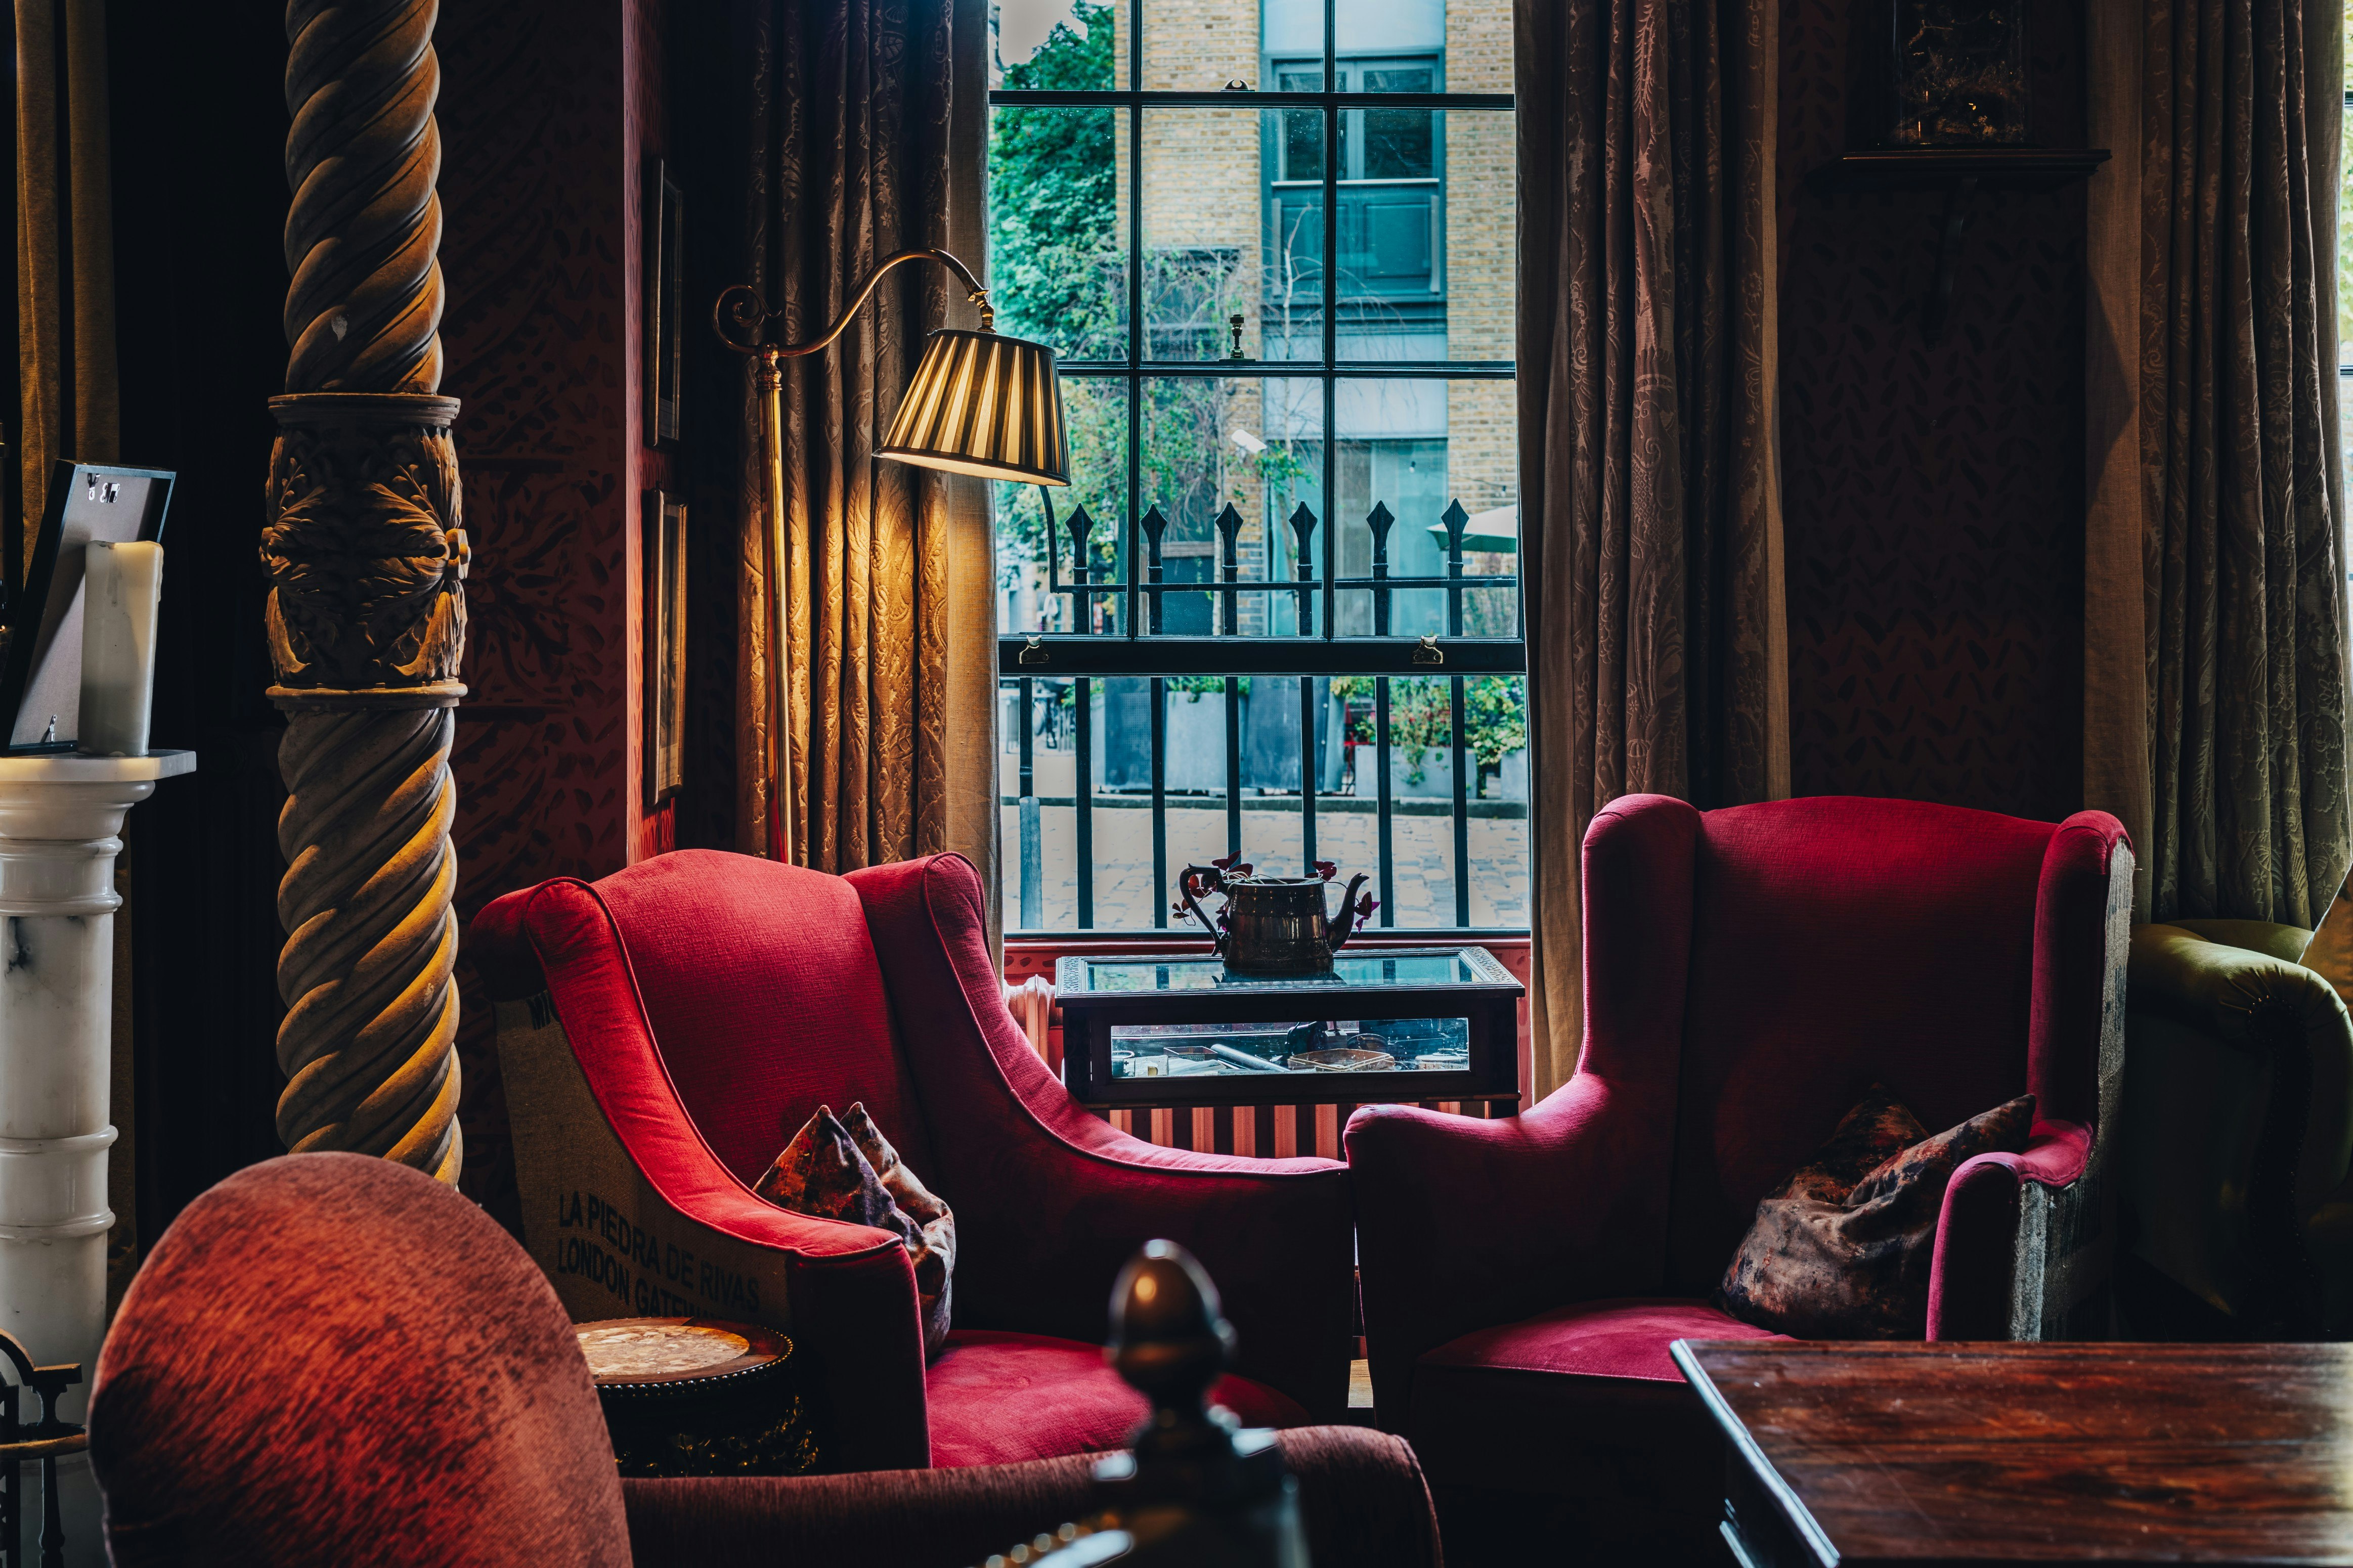 Townhouses Venues in London - The Zetter Townhouse, Clerkenwell